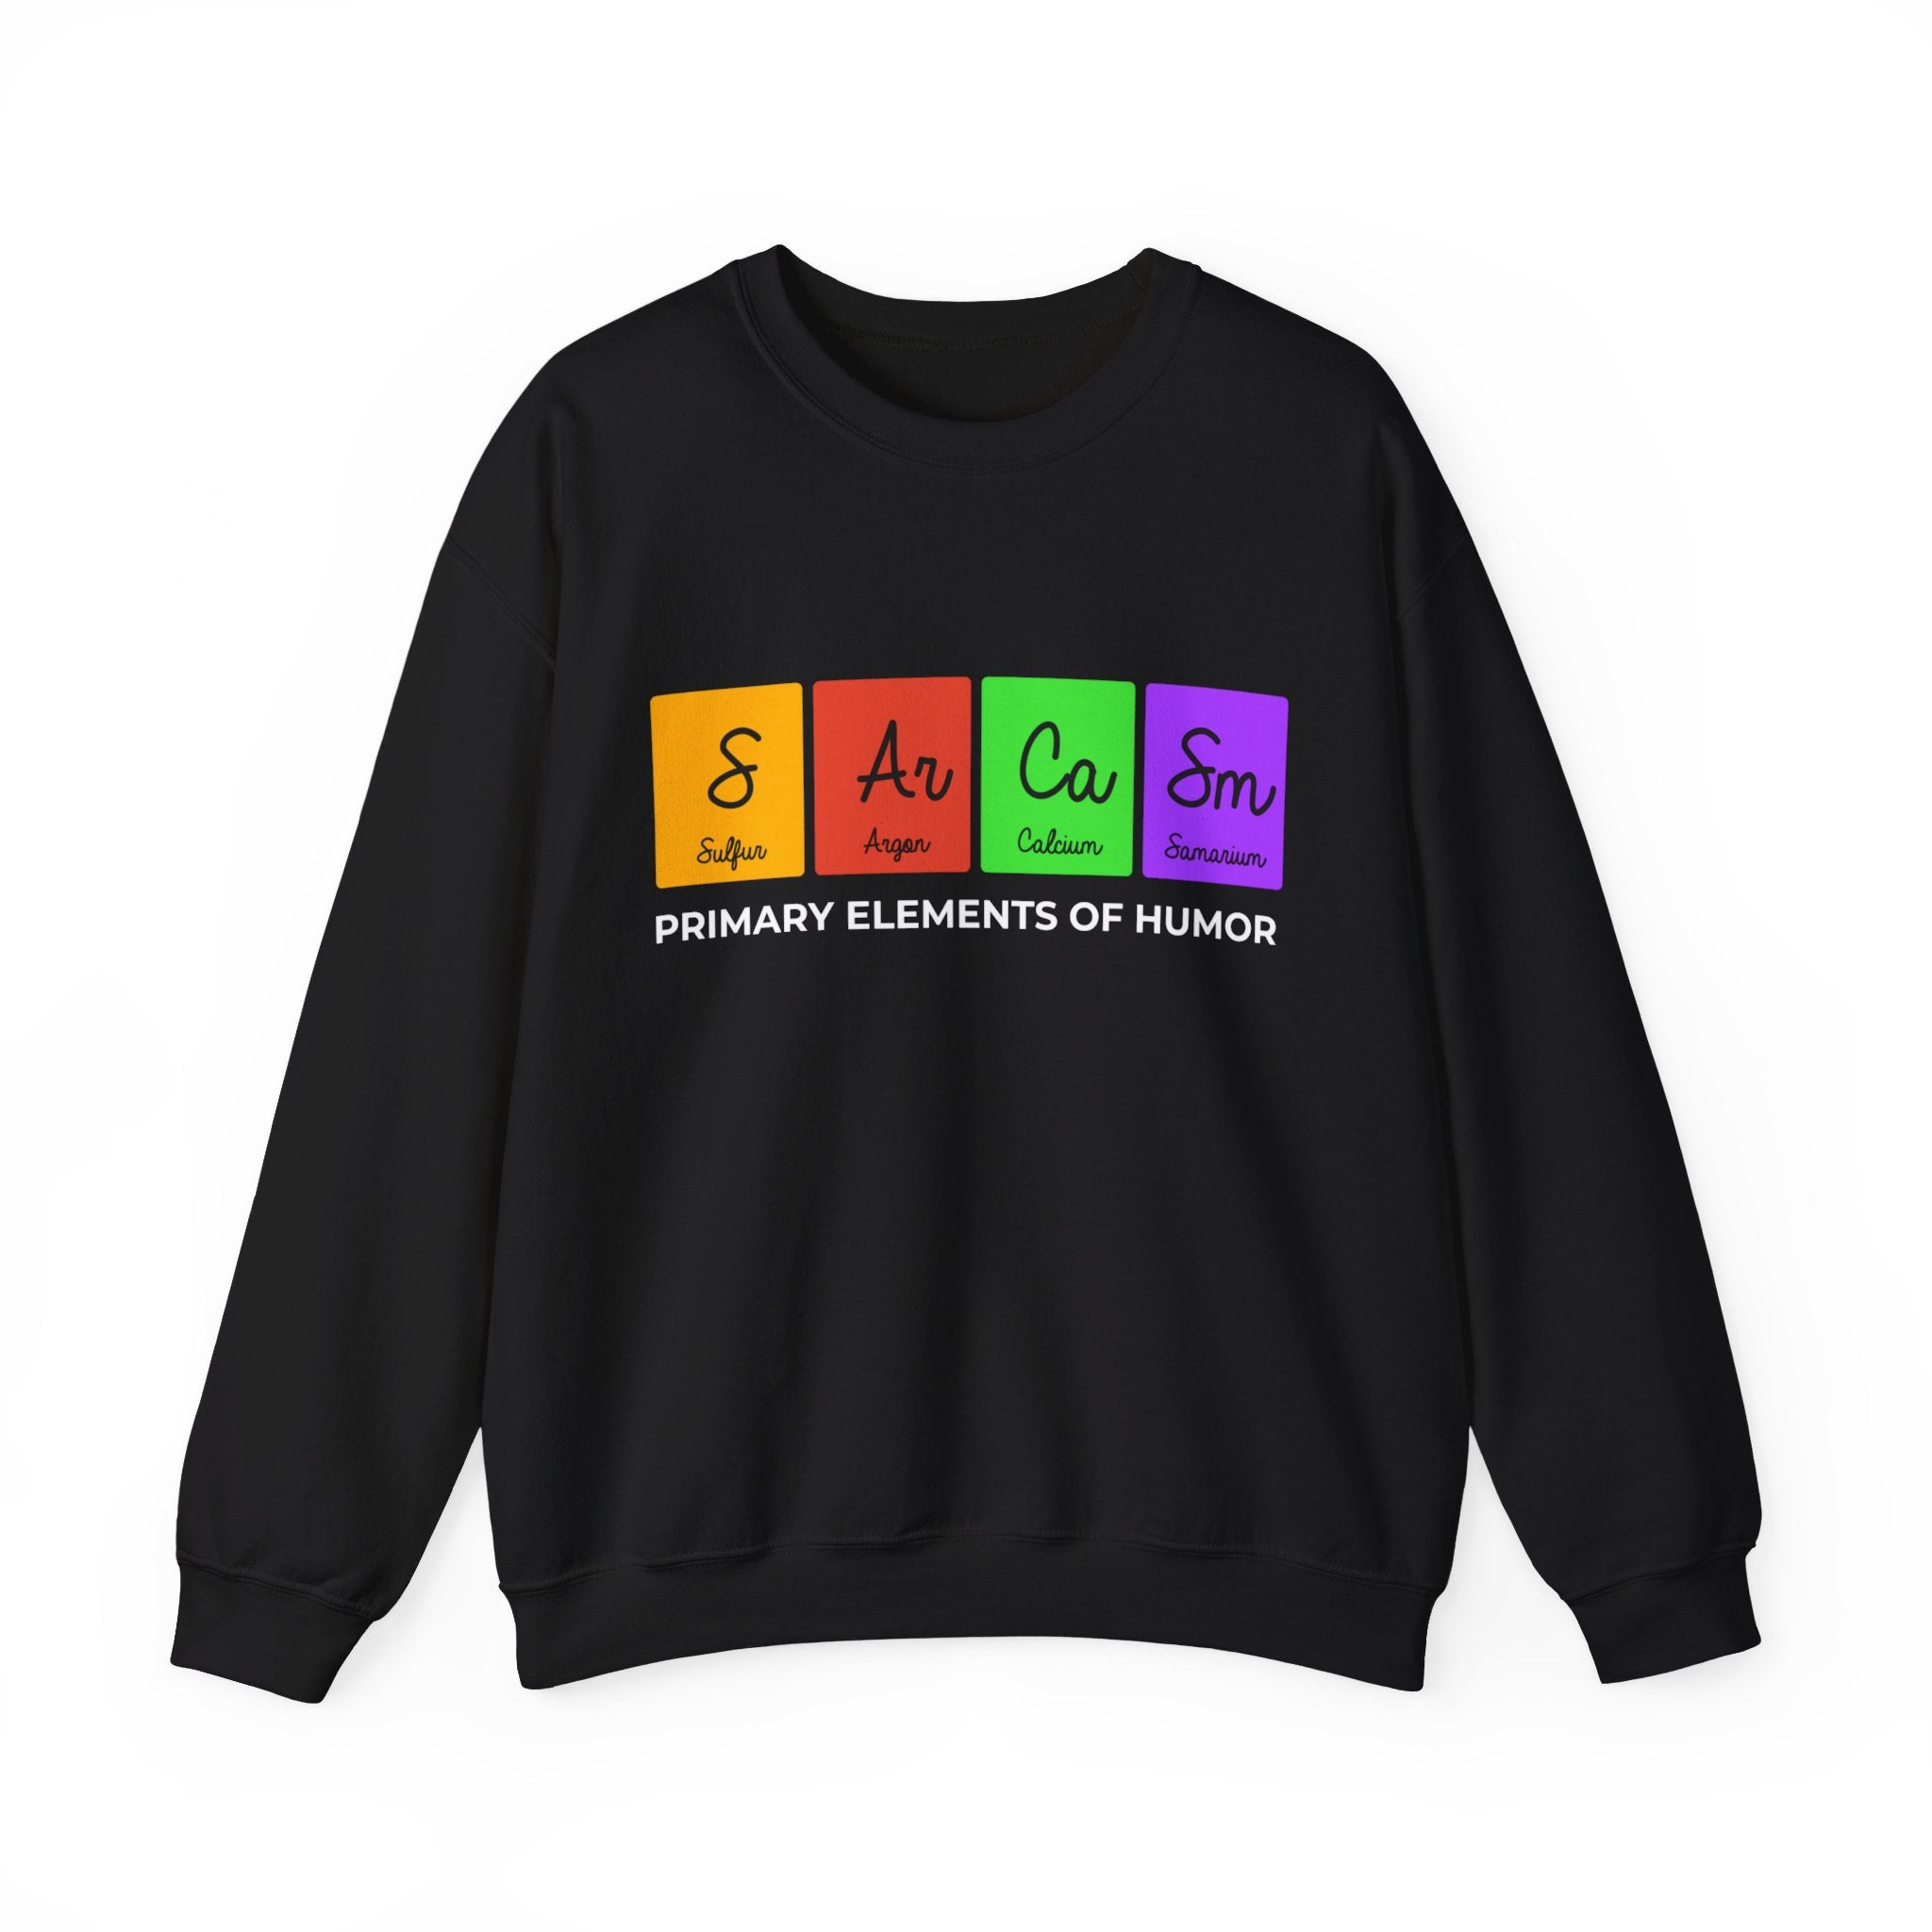 A cozy black sweatshirt featuring the S-Ar-Ca-Sm - Sweatshirt design, with four colorful periodic table elements labeled "S Ar Ca Sm" and the caption "Primary Elements of Humor.